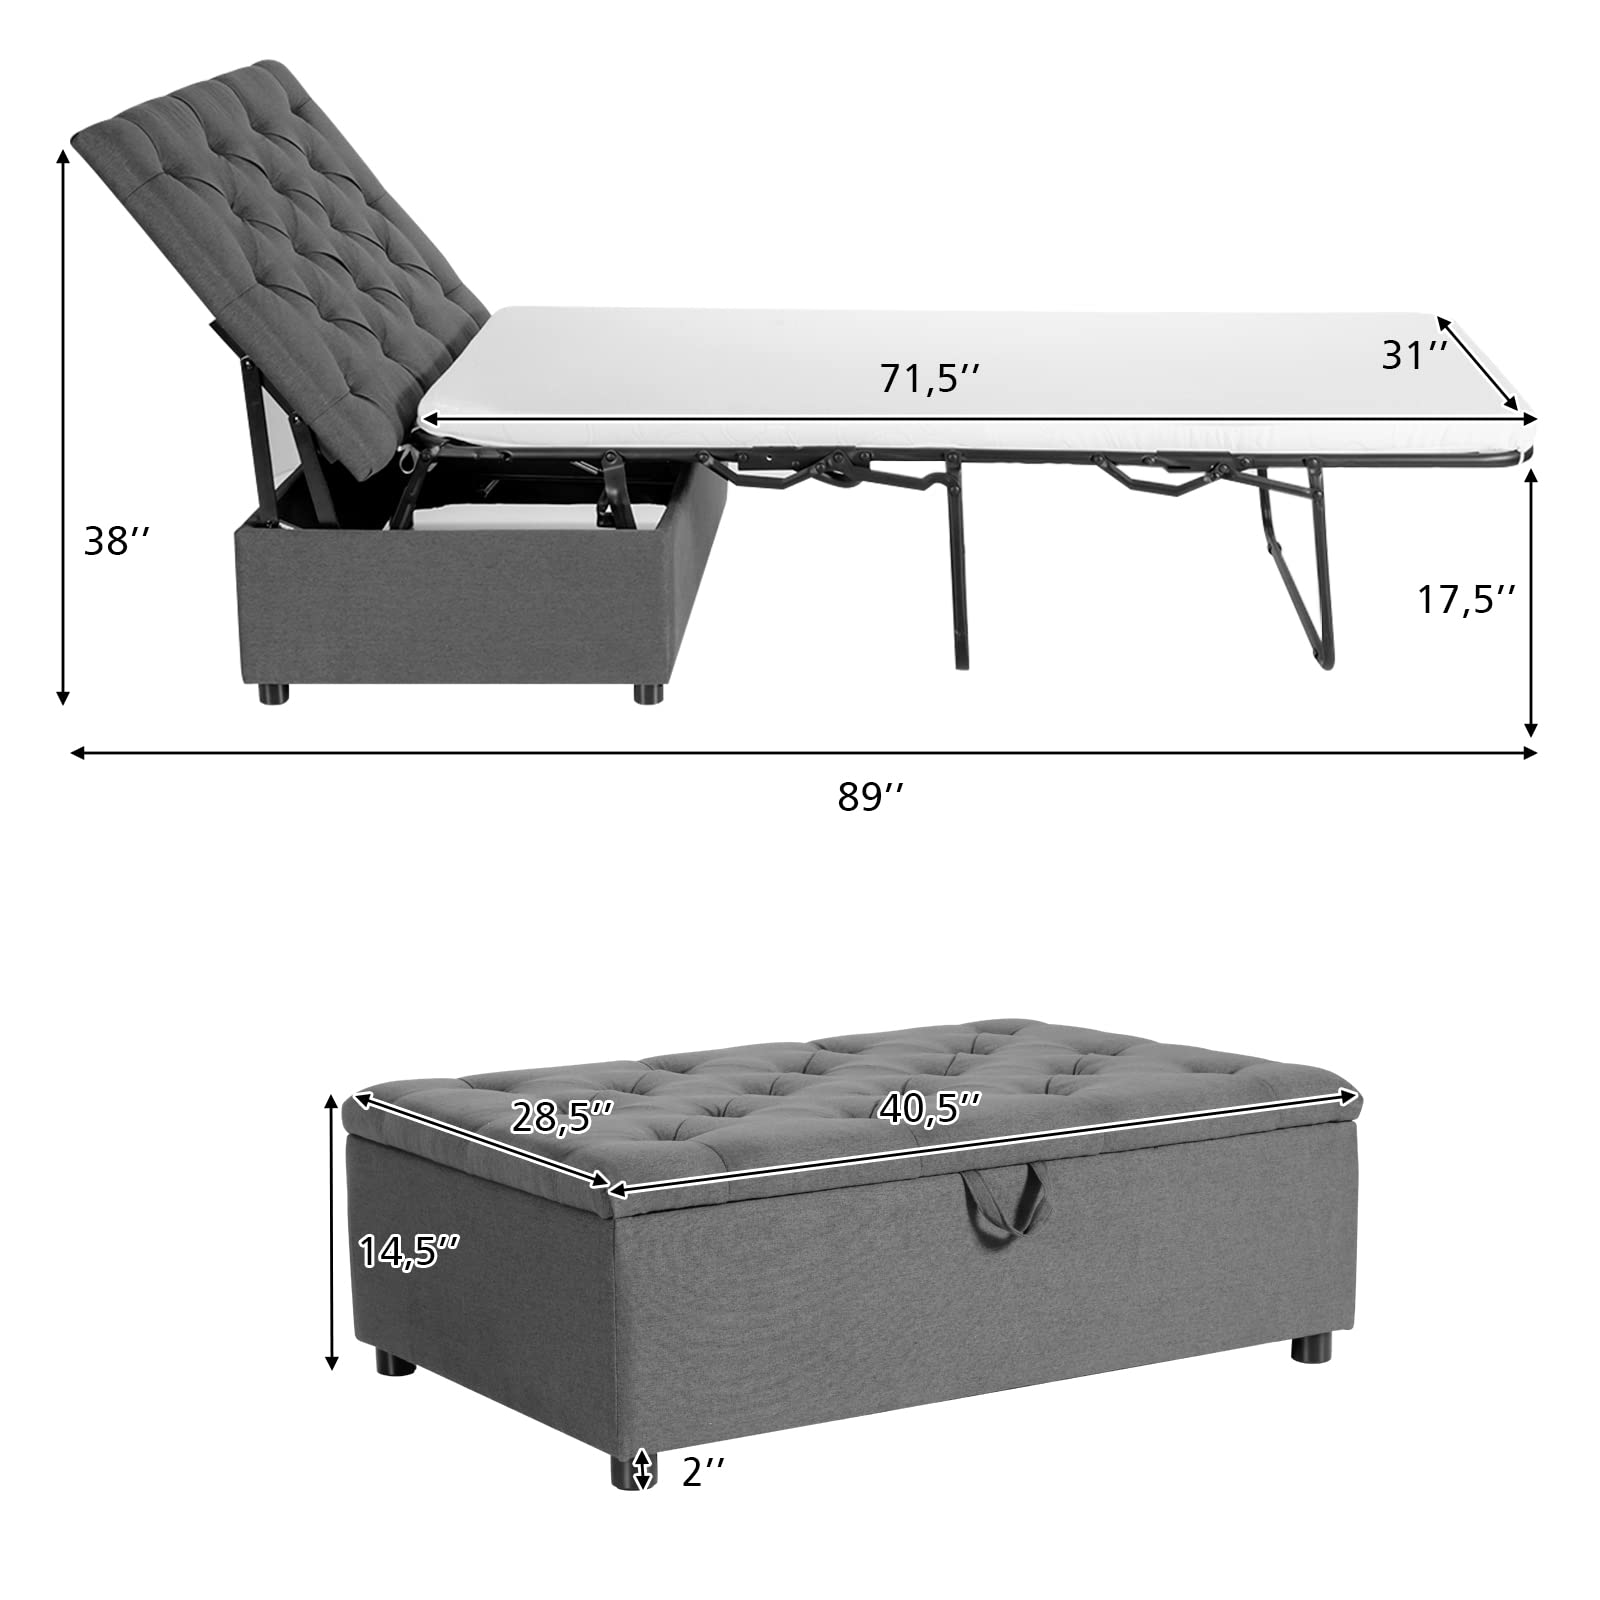 Giantex Ottoman Folding Bed, Fold Out Sleeper Bed with Mattress, Convertible Chair into Sofa Bed